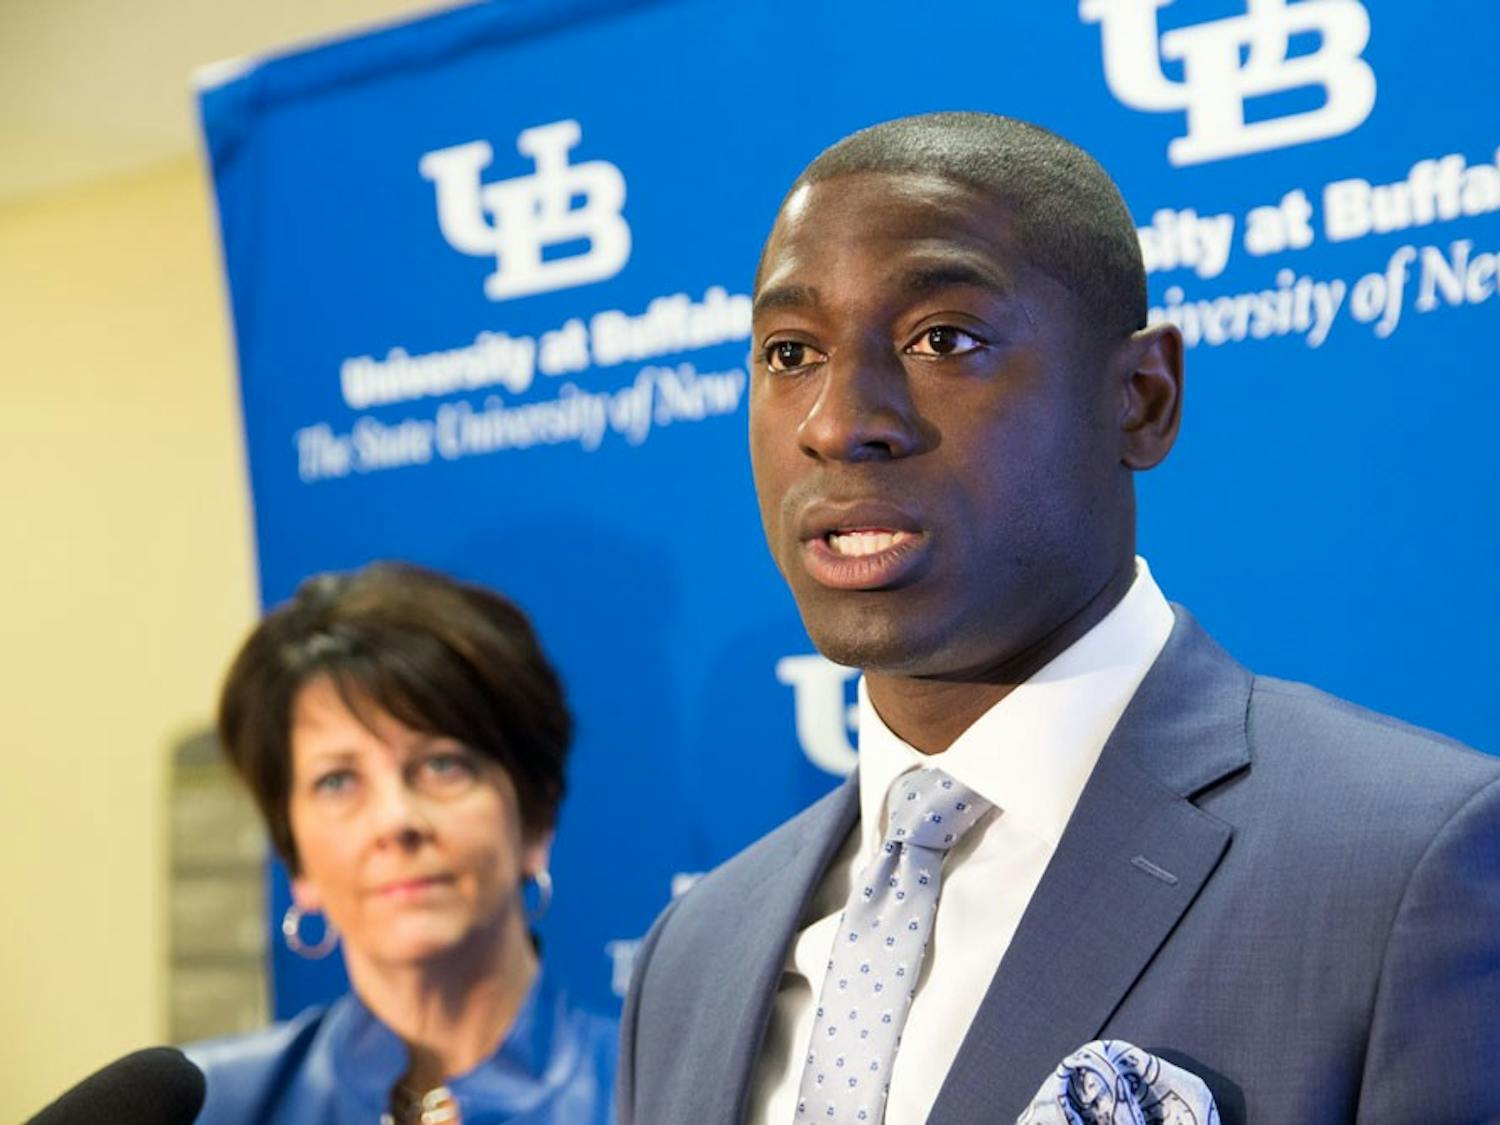 Athletic Director Allen Greene (front) speaks at Tuesday’s press conference in Capen Hall about UB Athletics’ new branding, as Nancy Paton (back), vice president of university communications, looks on. With a university-wide branding initiative, UB Athletics’ branding will no once again feature “Buffalo” prominently instead of “New York.”